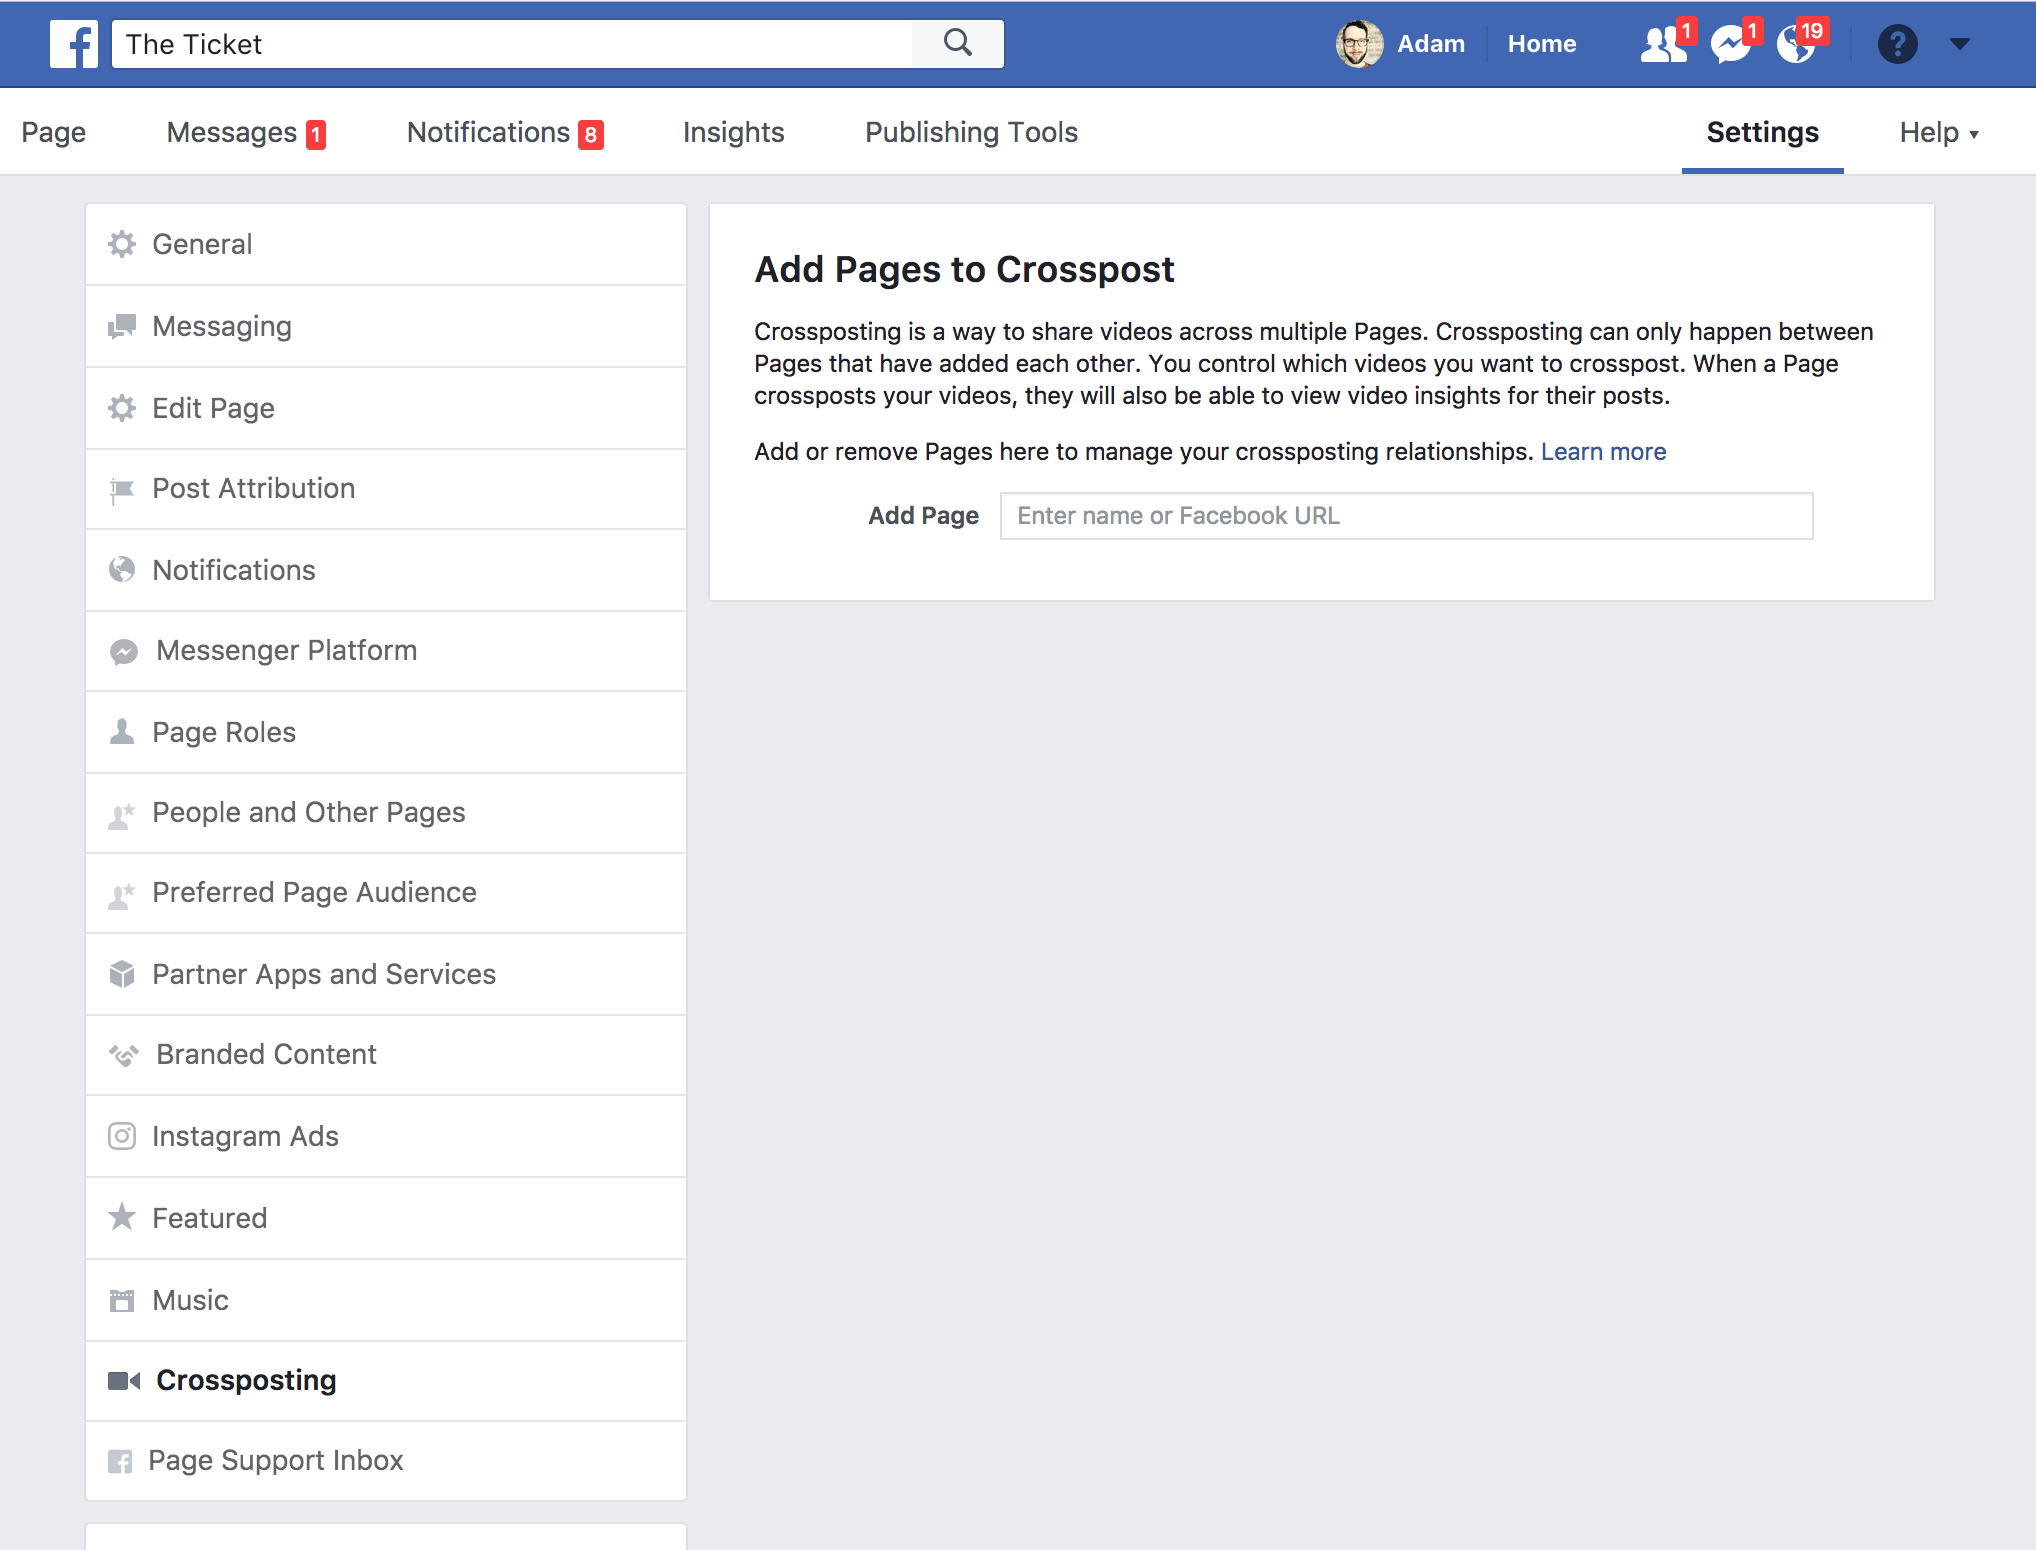 Screenshot of the crossposting settings page from Facebook